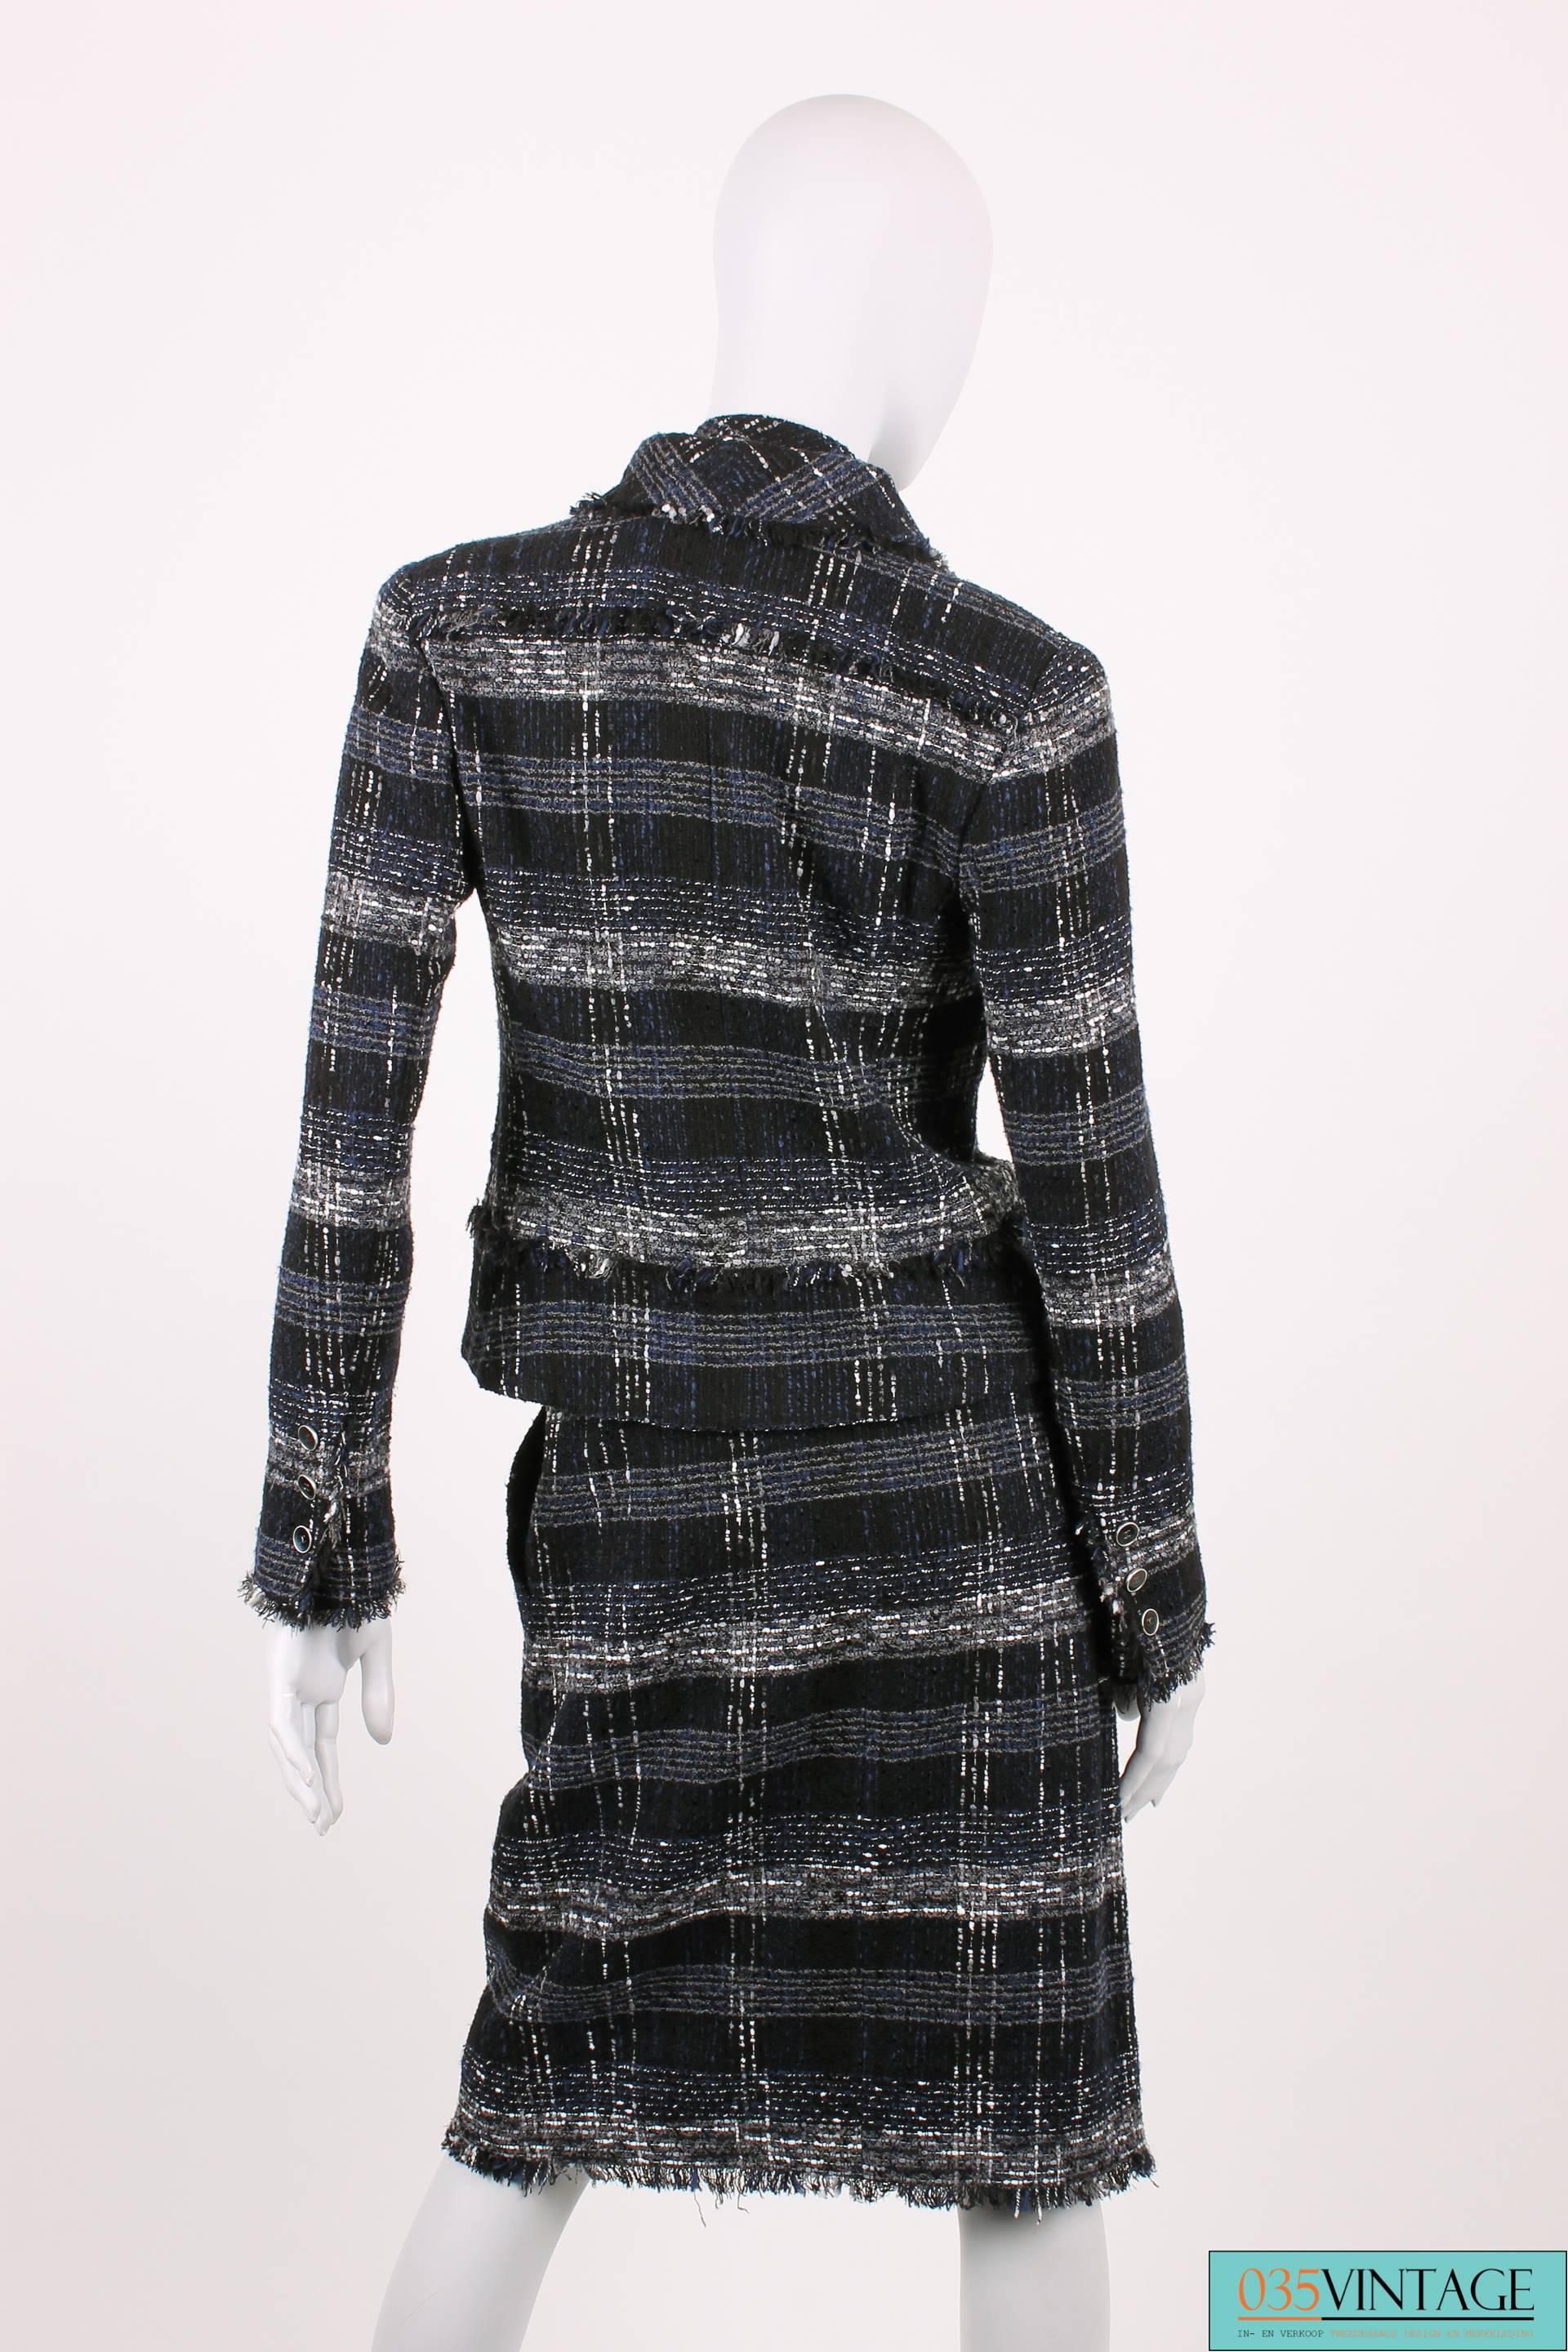 Chanel suit from the Ready To Wear Runway Spring Collection of 2005, breathtaking!

The dark blue, black, grey and white checkered jacket has a collar and a five button closure at the front. The buttons are black and silver, an interlocking